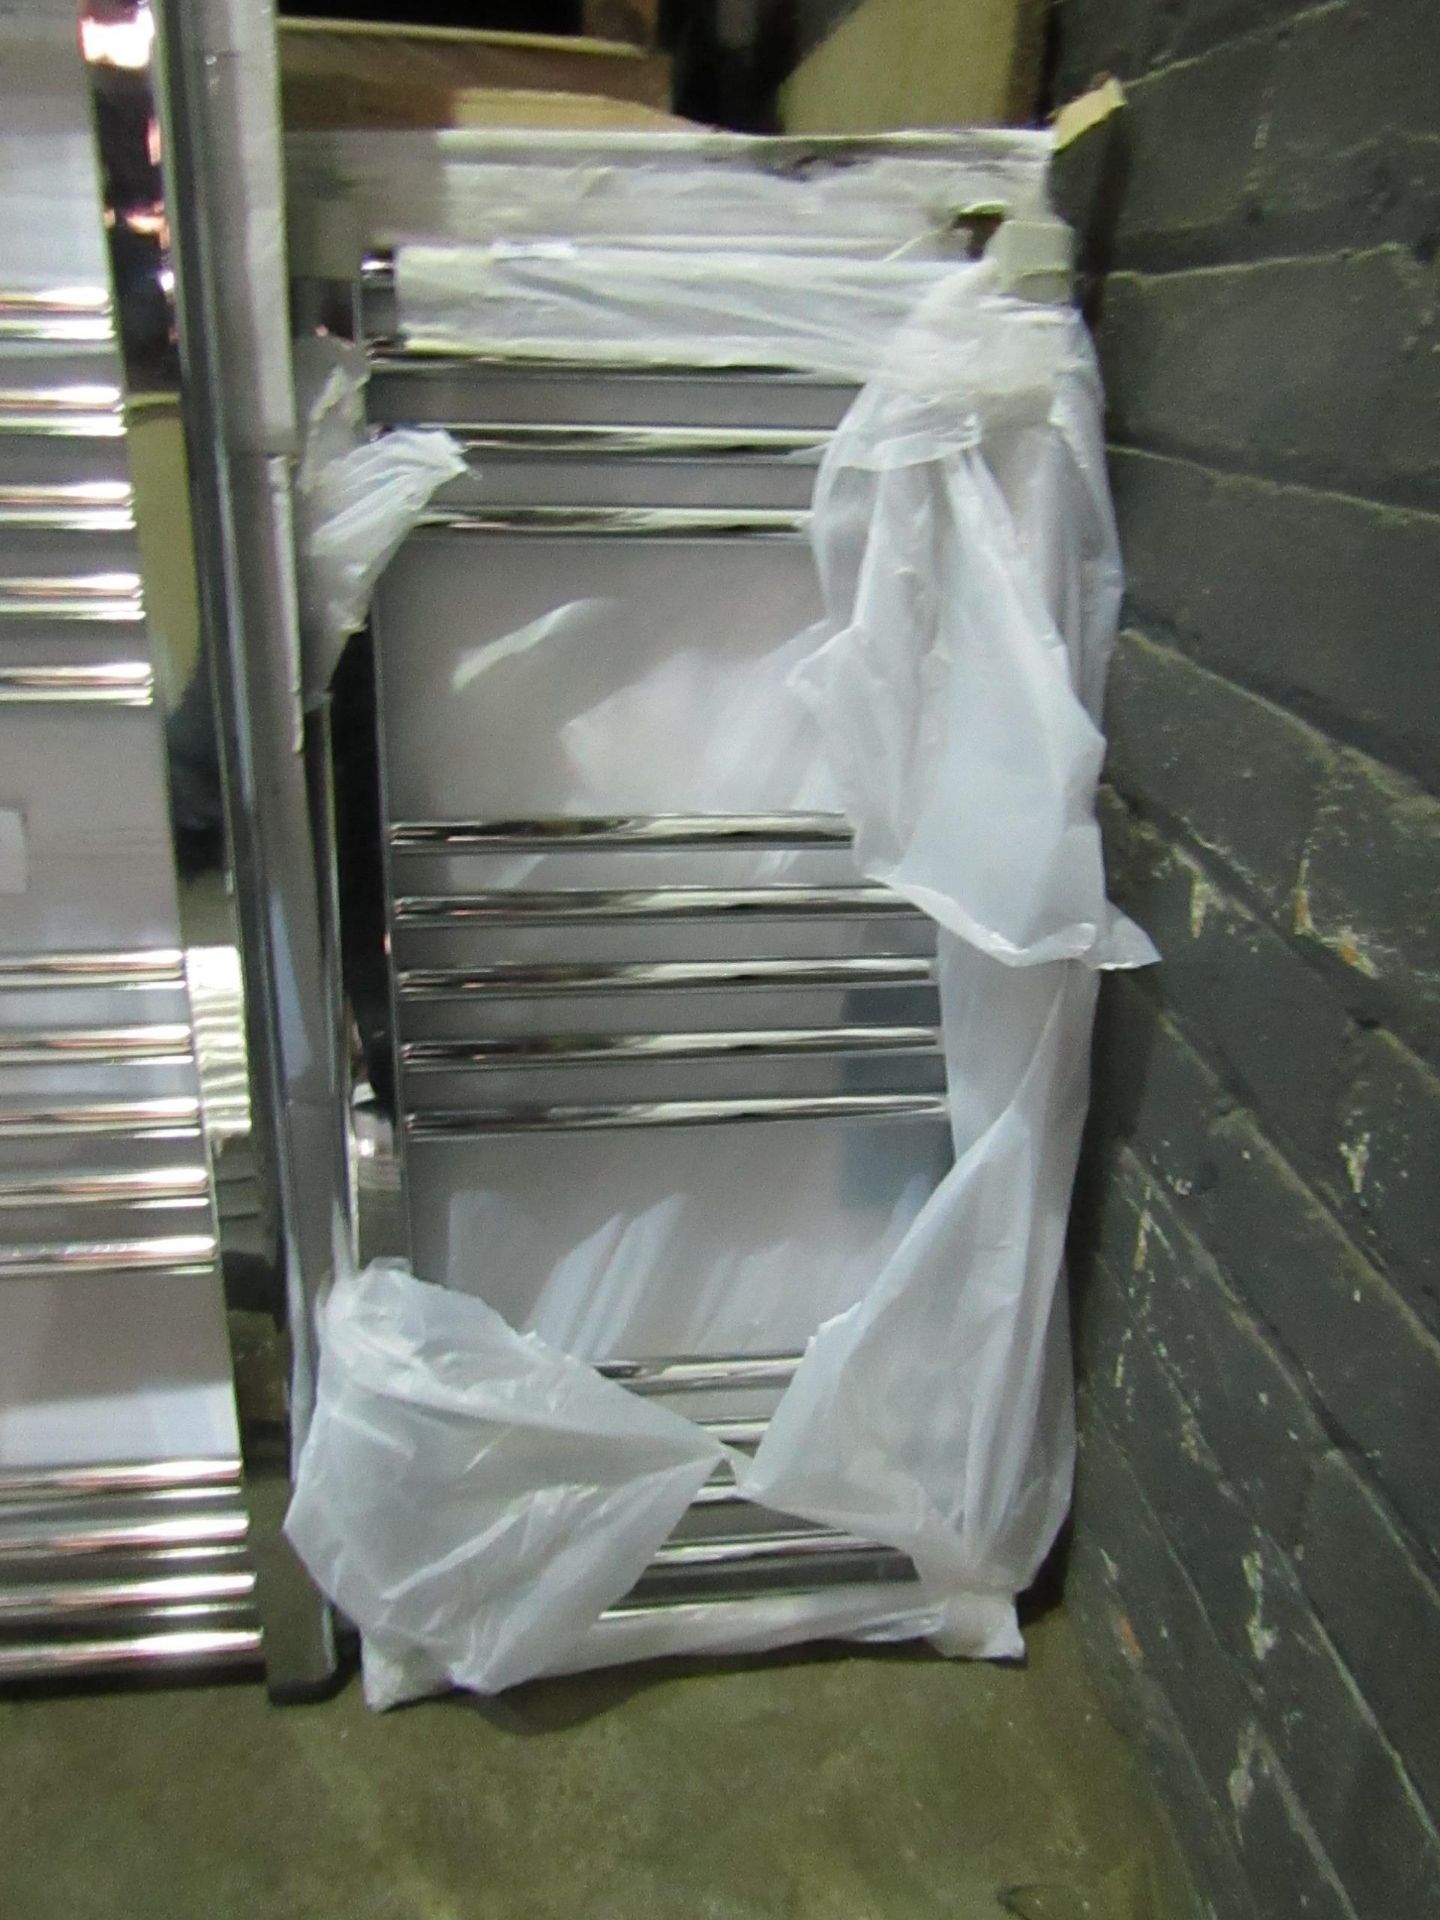 Arley Professional - Loco Chrome Straight Heated Towel Rail 500x1100mm - Unchecked For Hanging Kits,